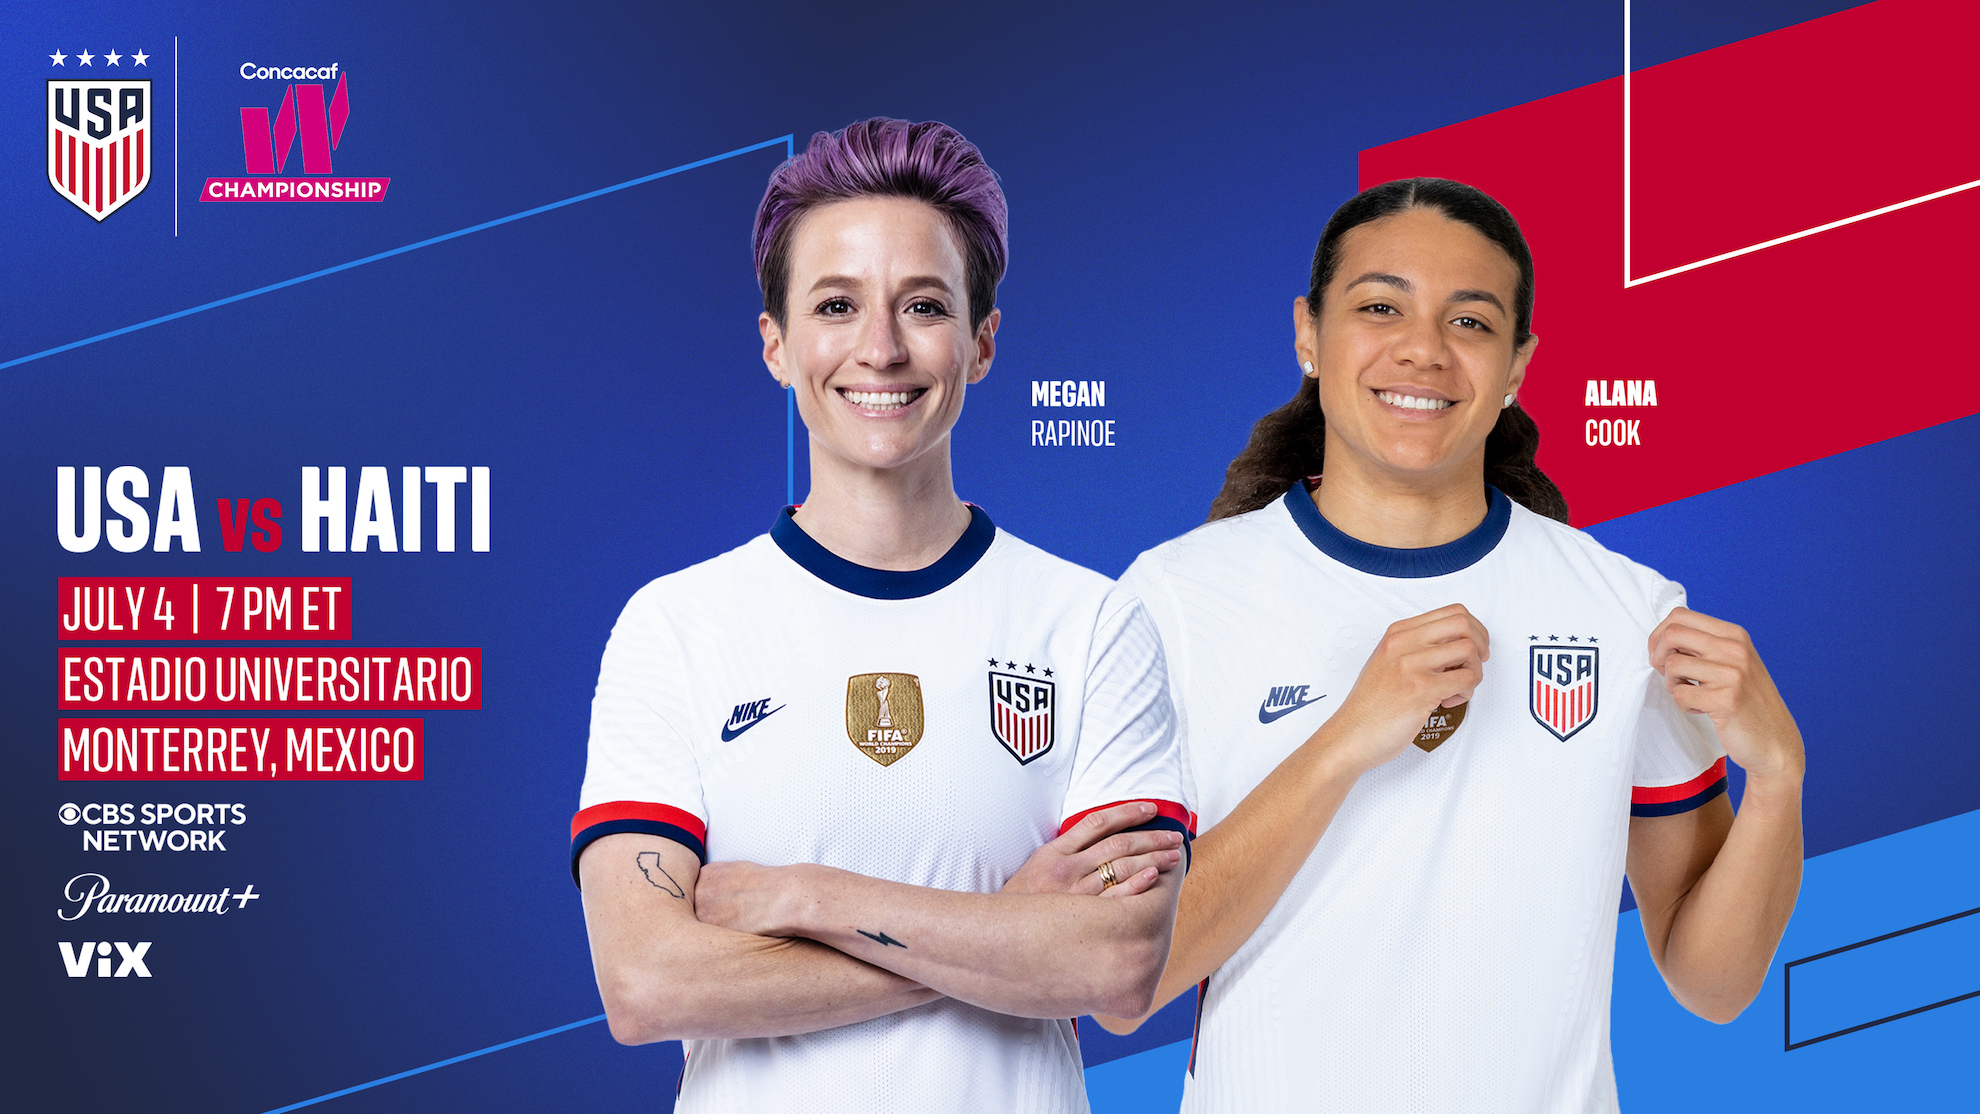 USWNT Opens Group A Play At Concacaf W Championship Against Haiti - U.S. Soccer : Watch USA-Haiti, Monday, July 4 at 7 p.m. ET / 6 p.m. CT on CBS Sports Network, Paramount+ and ViX  | Tranquility 國際社群